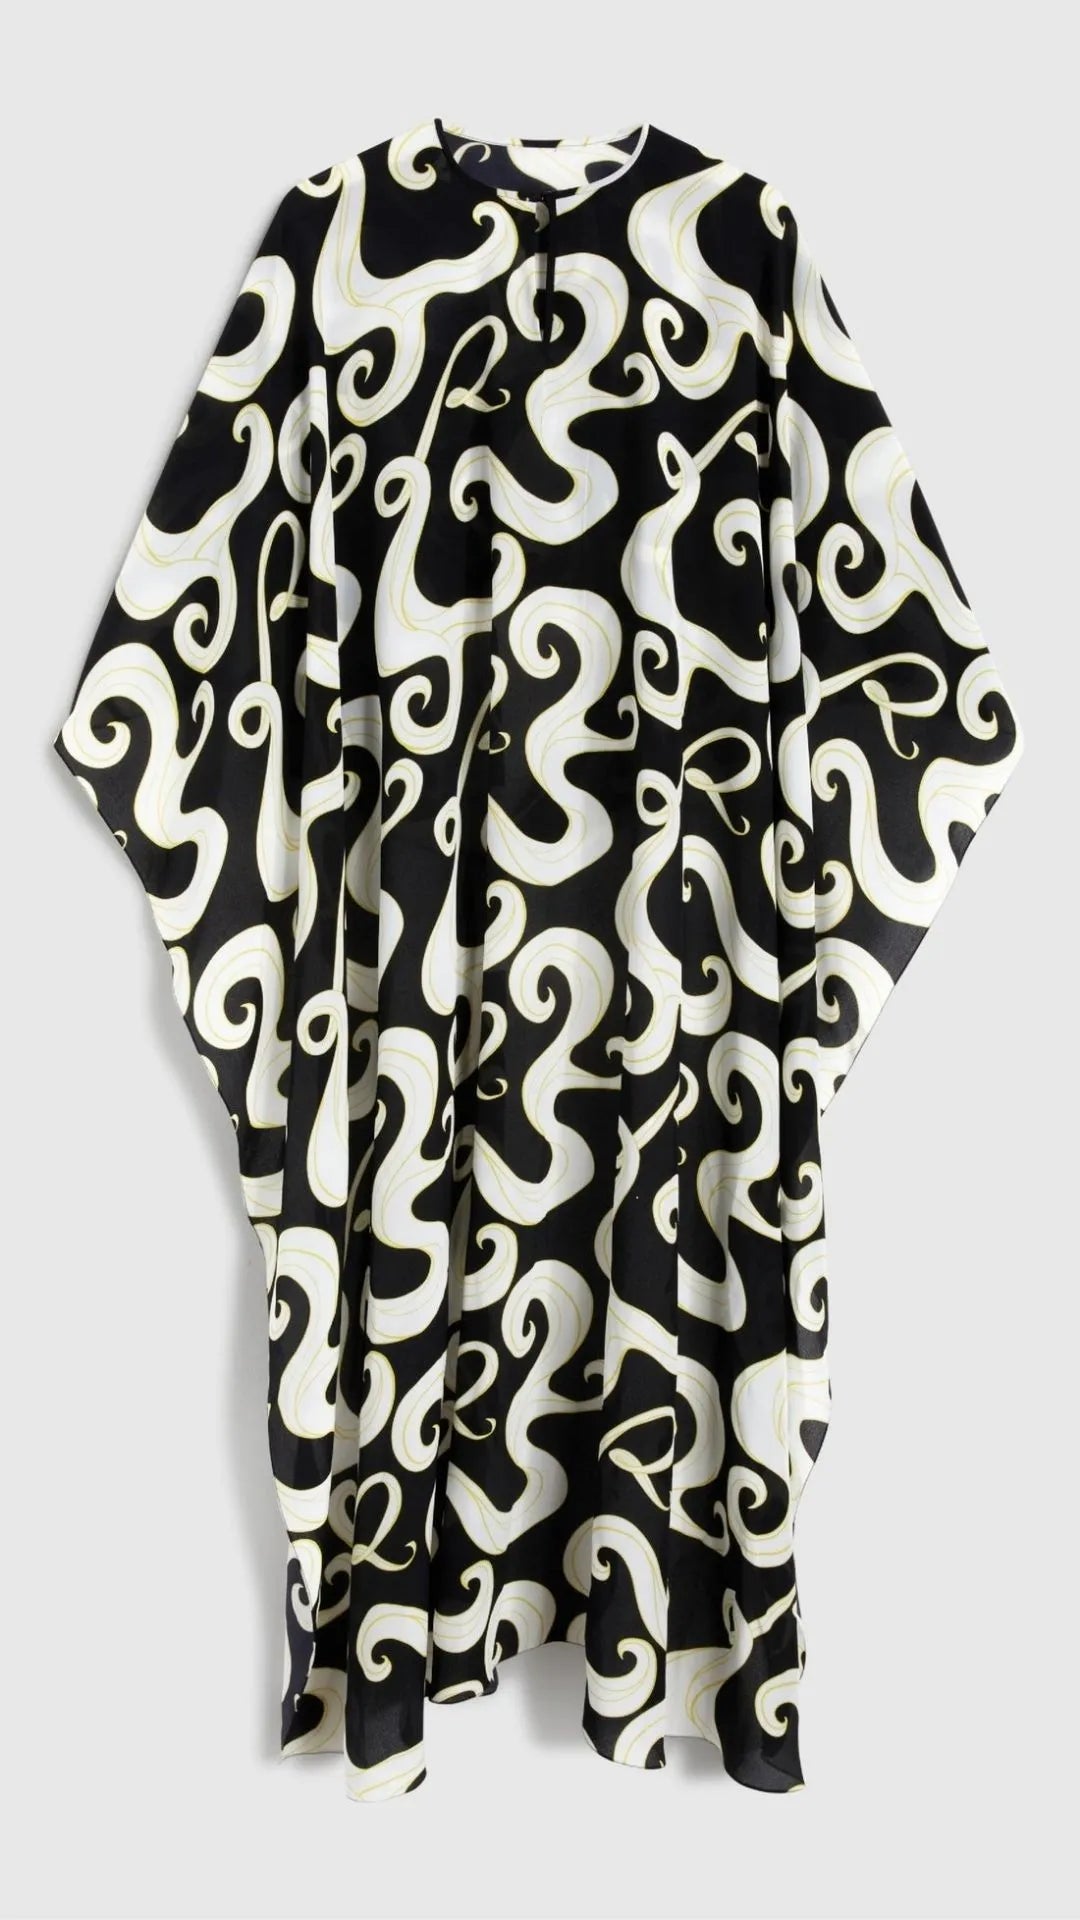 Rochas Paris Fashion Asymmetrical Fluid Top. With a waist length front and a dramatic caped back. Crafted in crepe de chine in a black and white pattern with yellow highlights. This is a product photo from the back.